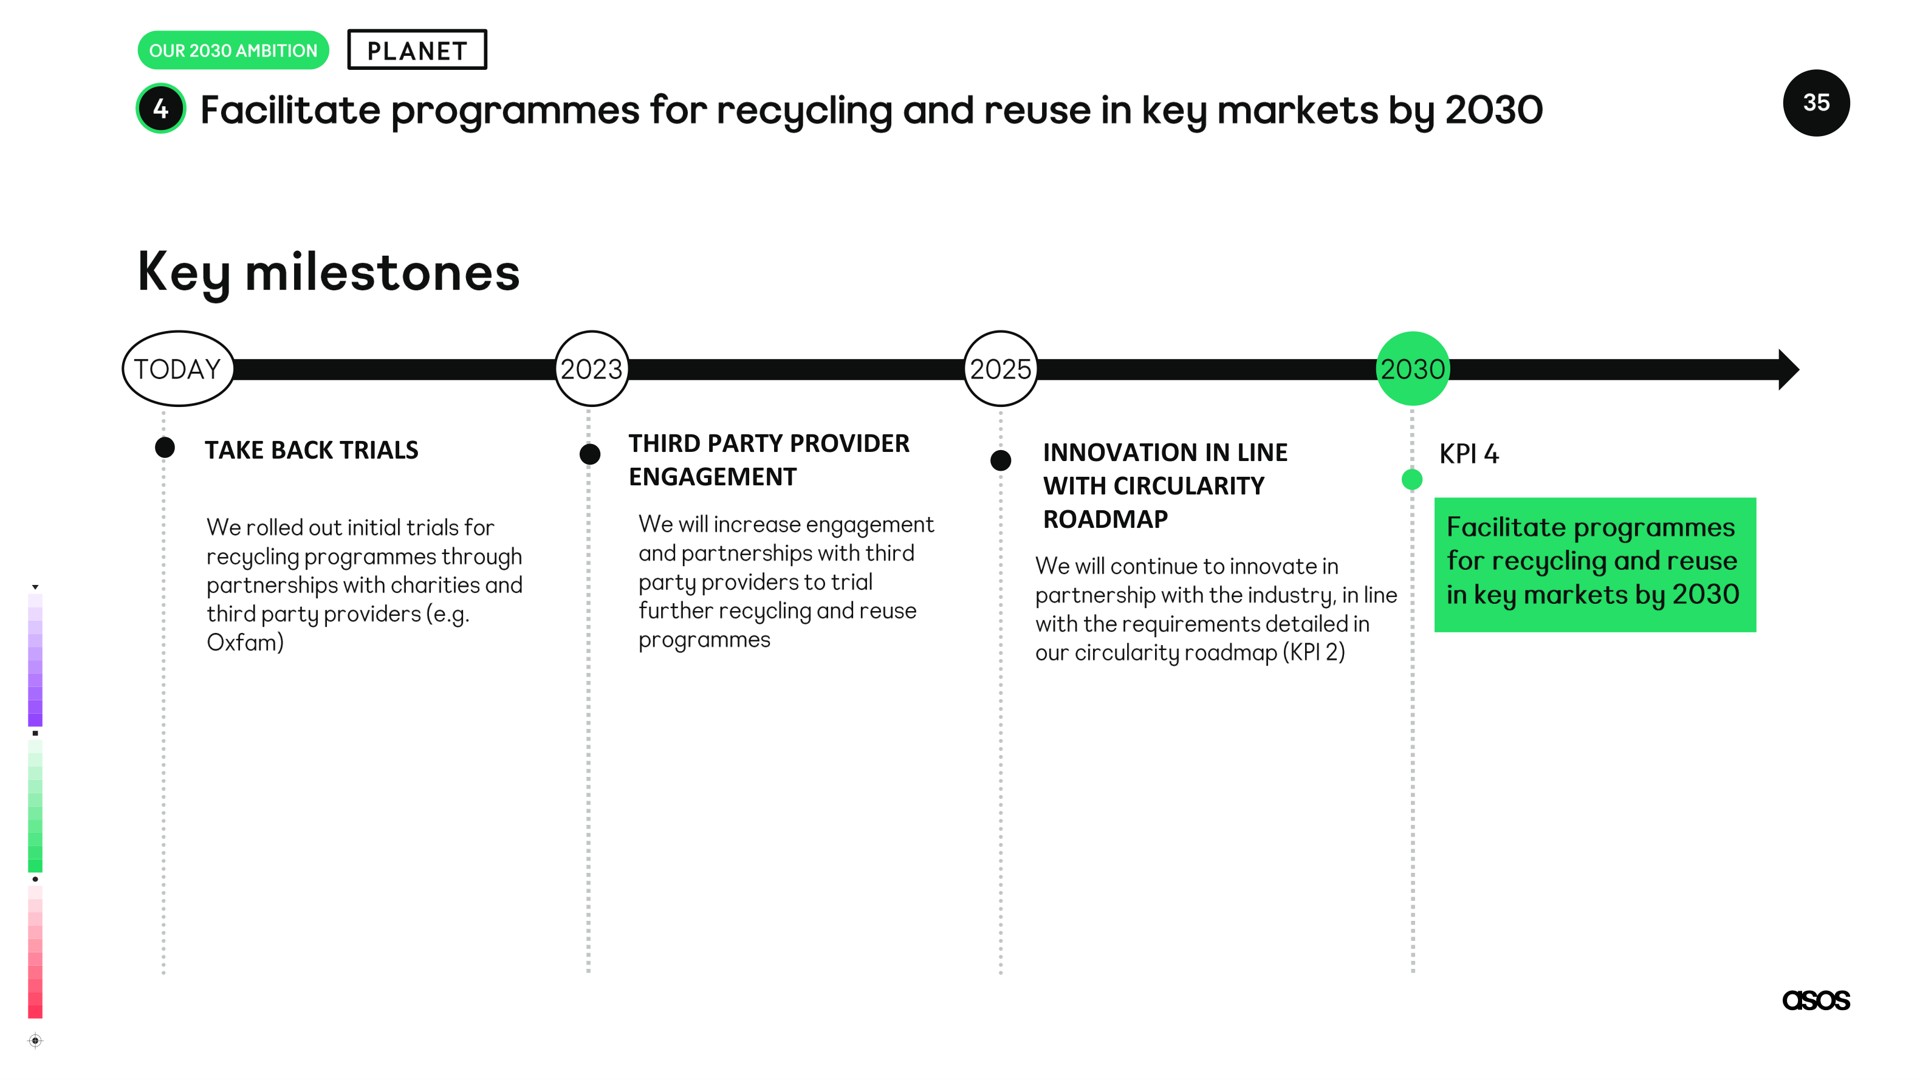 take back trials third party provider engagement innovation in line with circularity facilitate programmes for recycling and reuse key markets by key milestones | Asos